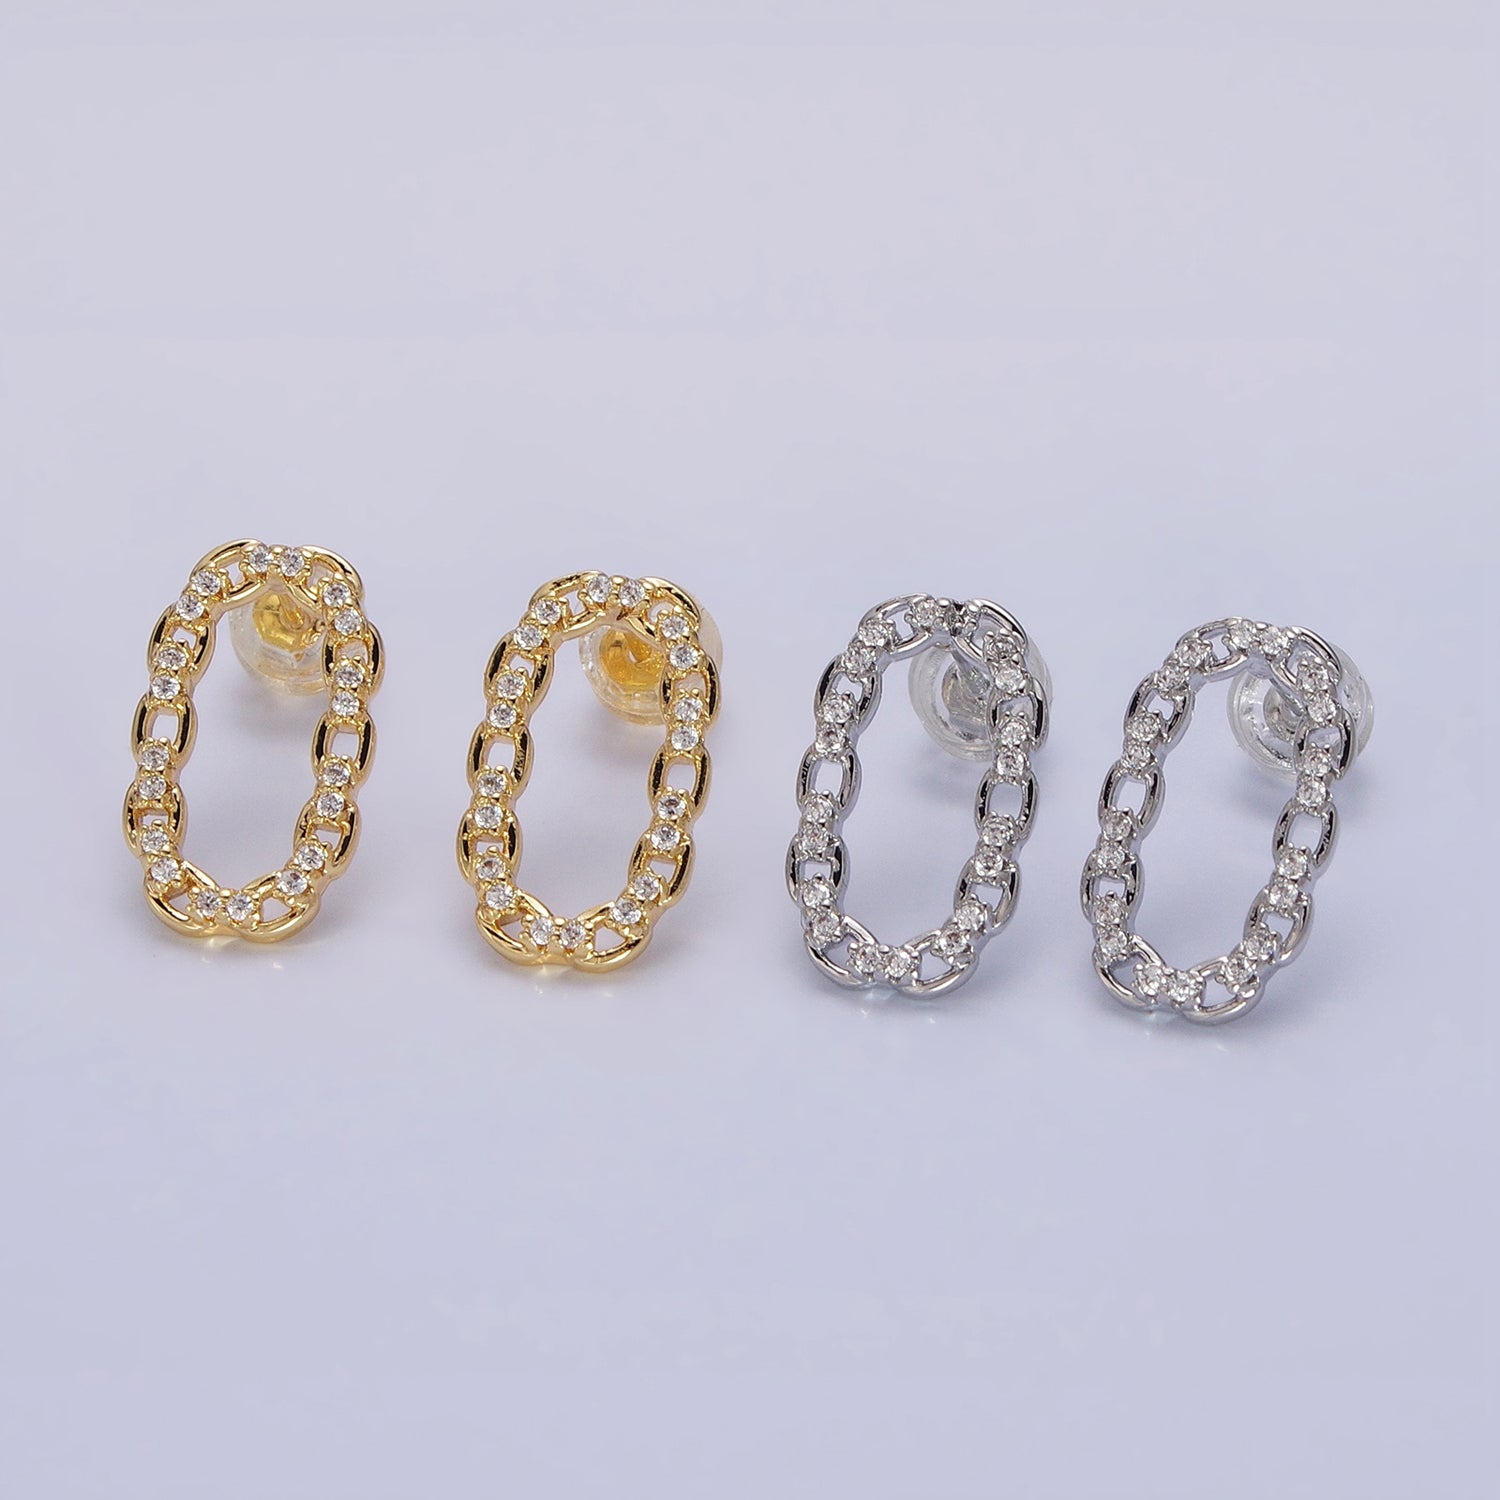 16K Gold Filled Open Oblong CZ Cable Link Stud Earrings in Gold & Silver | AD1309 AD1331 - DLUXCA